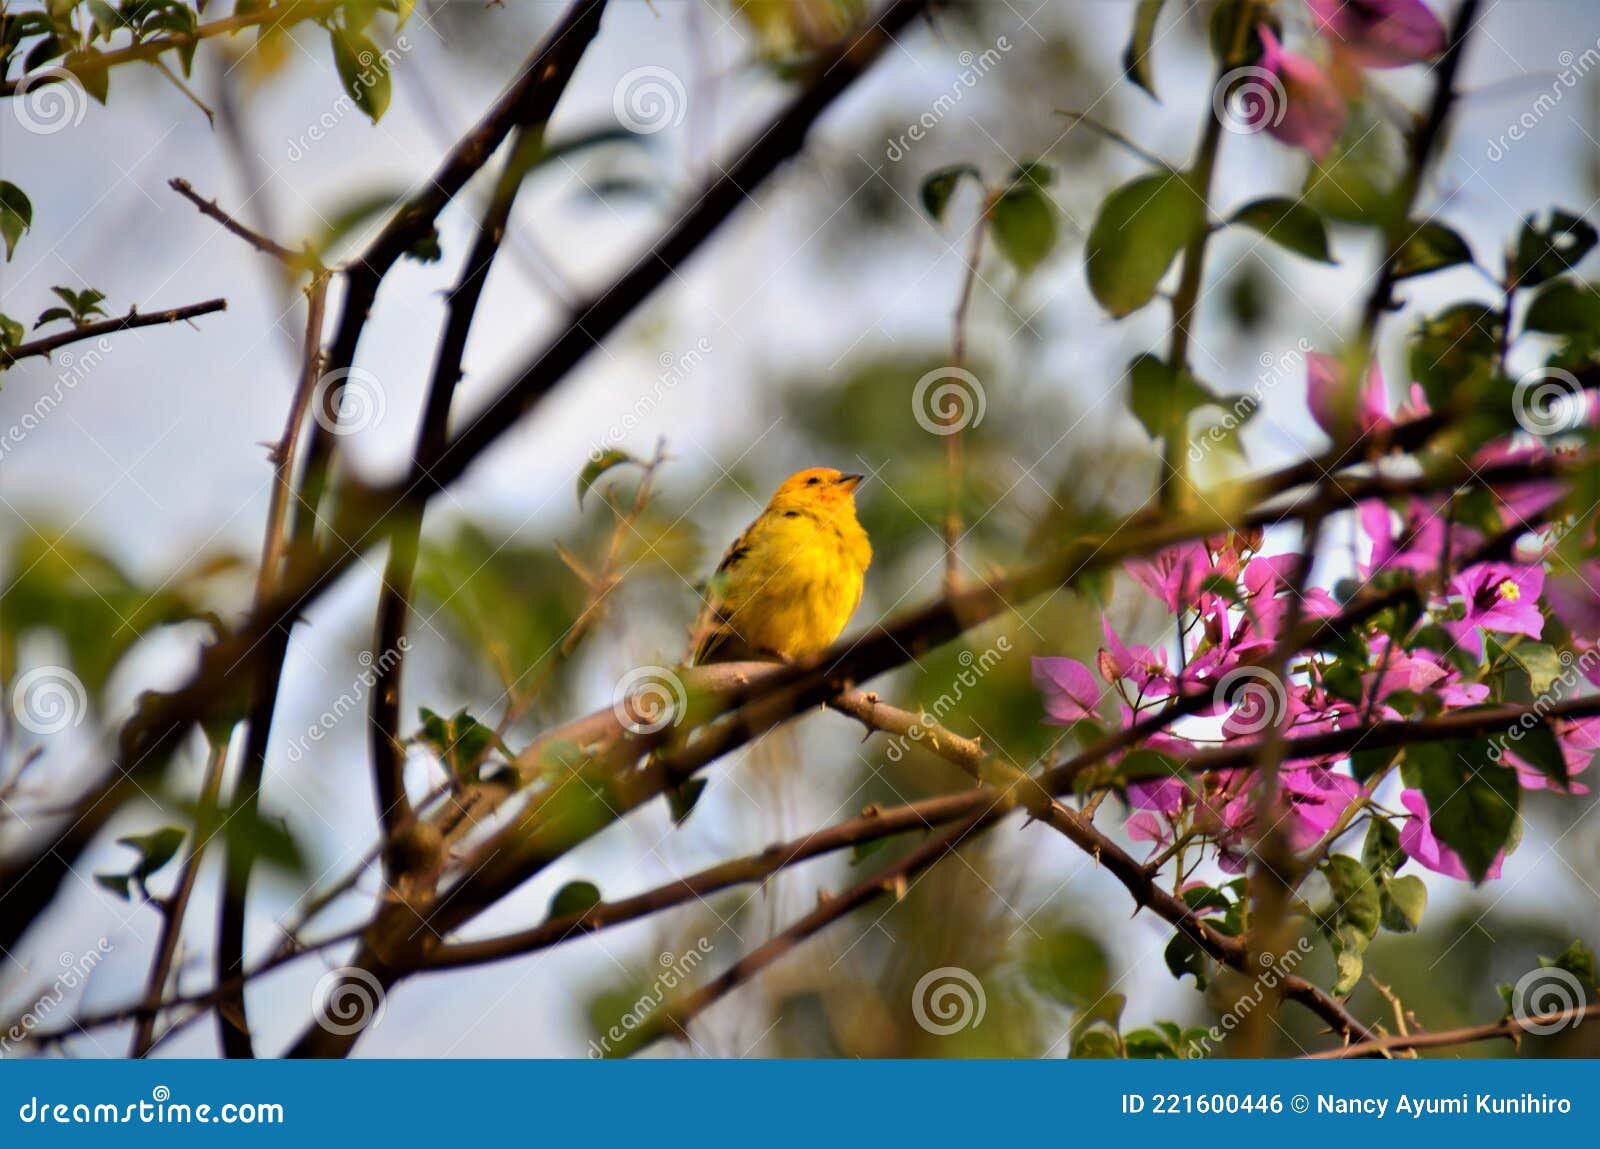 a graceful thoughtful sicalis flaveola on the bougainvillea branch